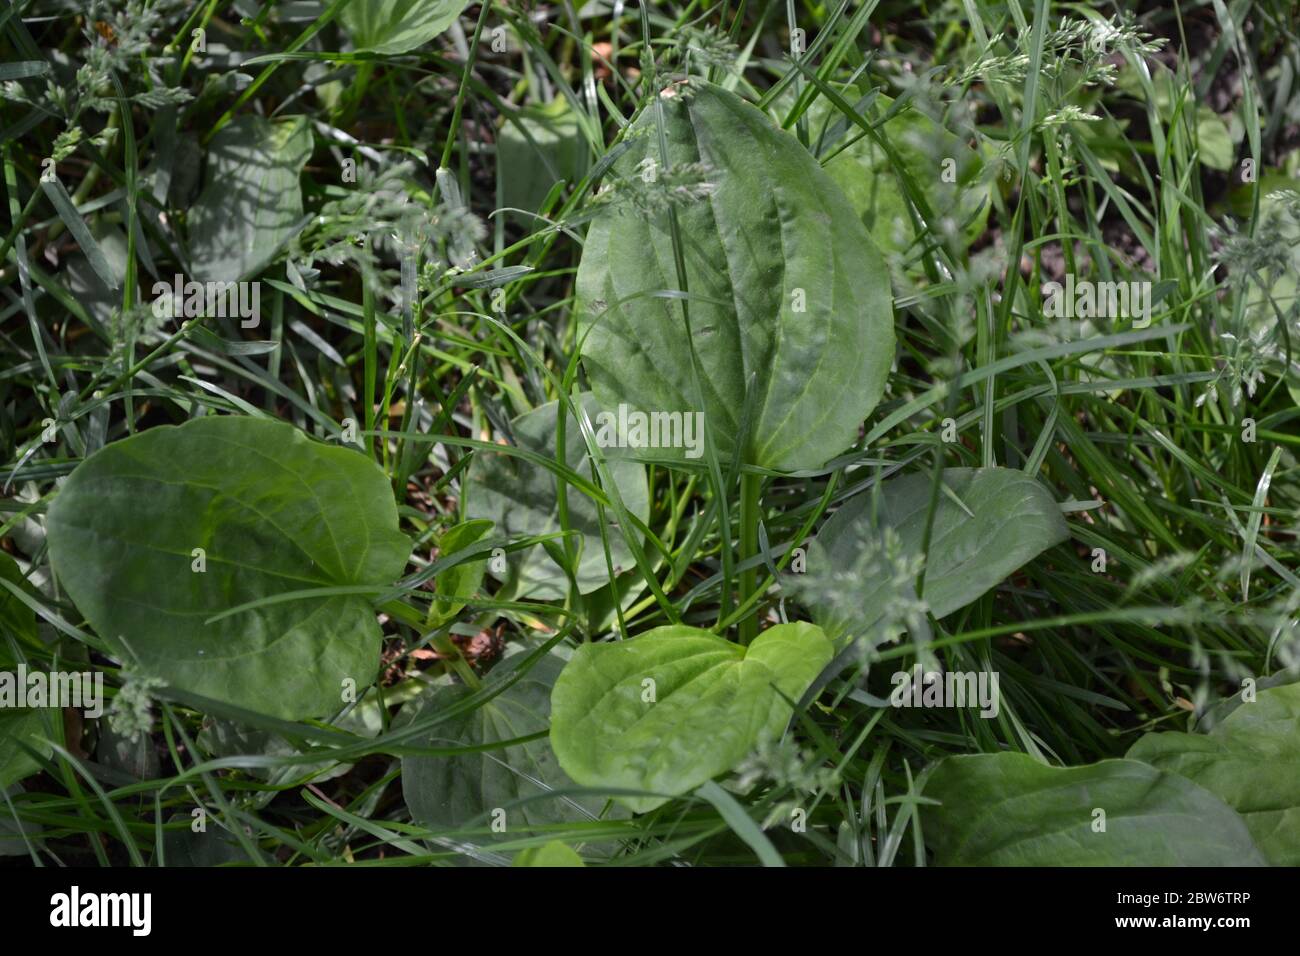 Valuable medicinal plant. Gardening. Green leaves. Plantain. Plantago Major, a perennial herb of the family Plantagenaceae Stock Photo